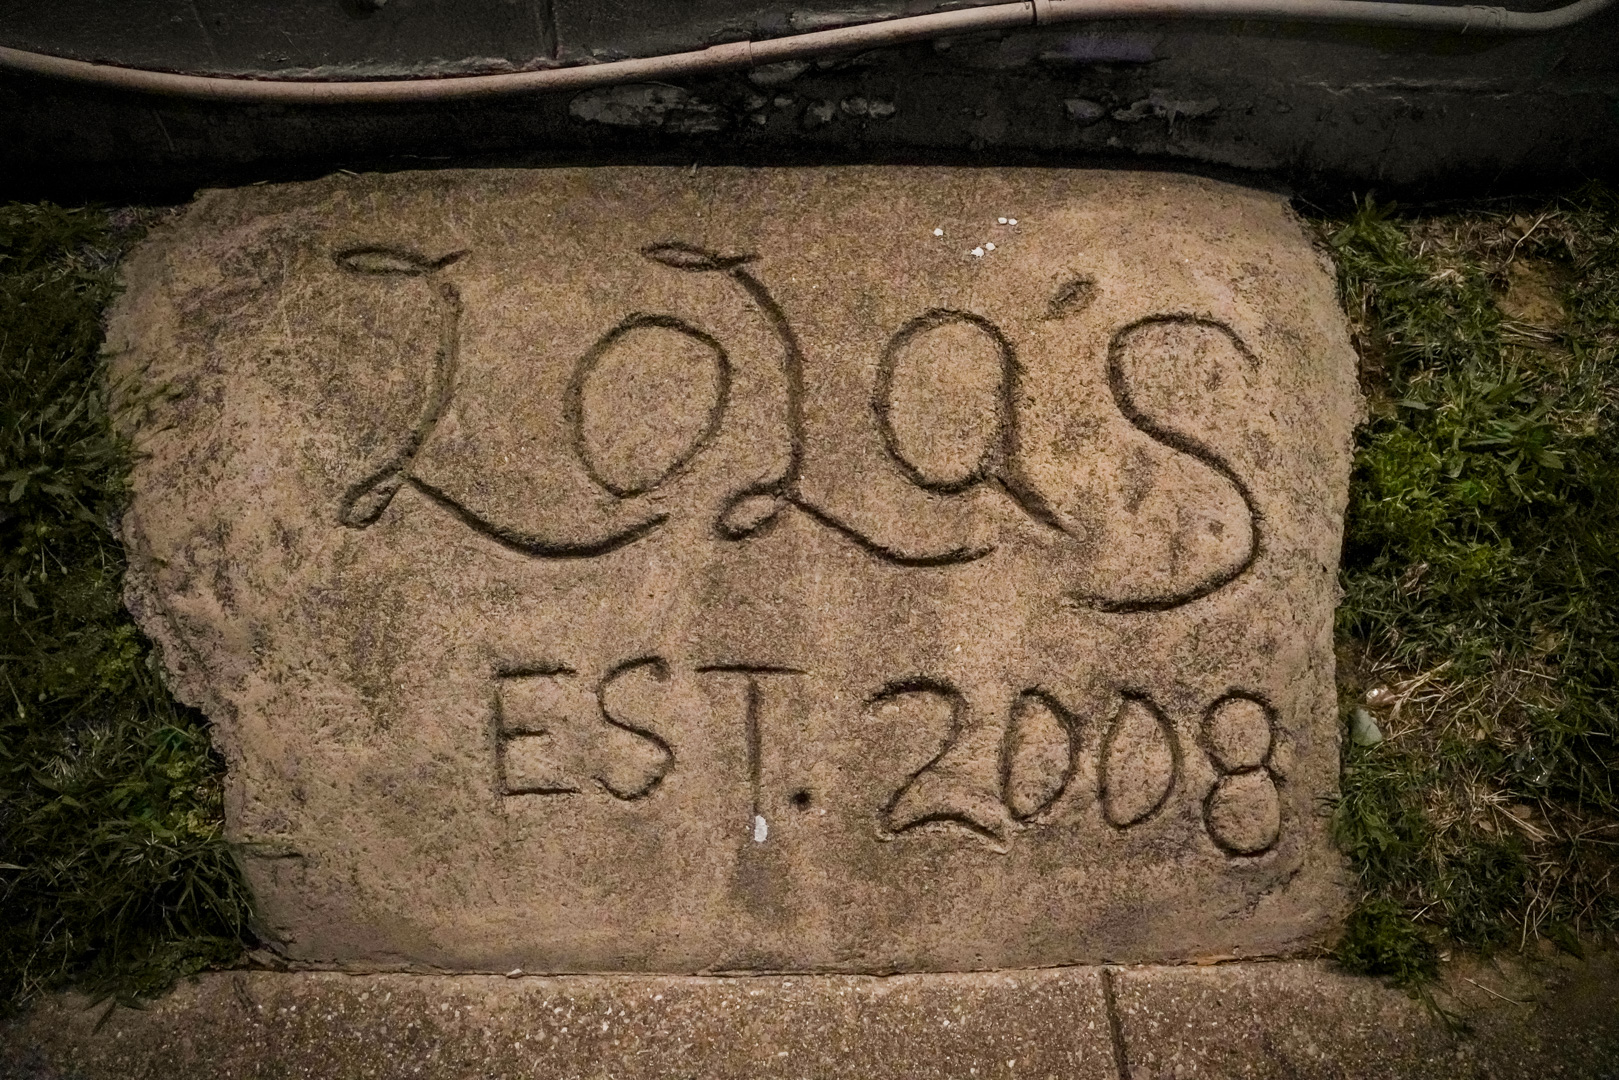 A piece of sidewalk cement with "LOLa'S EST. 2008" carved in it